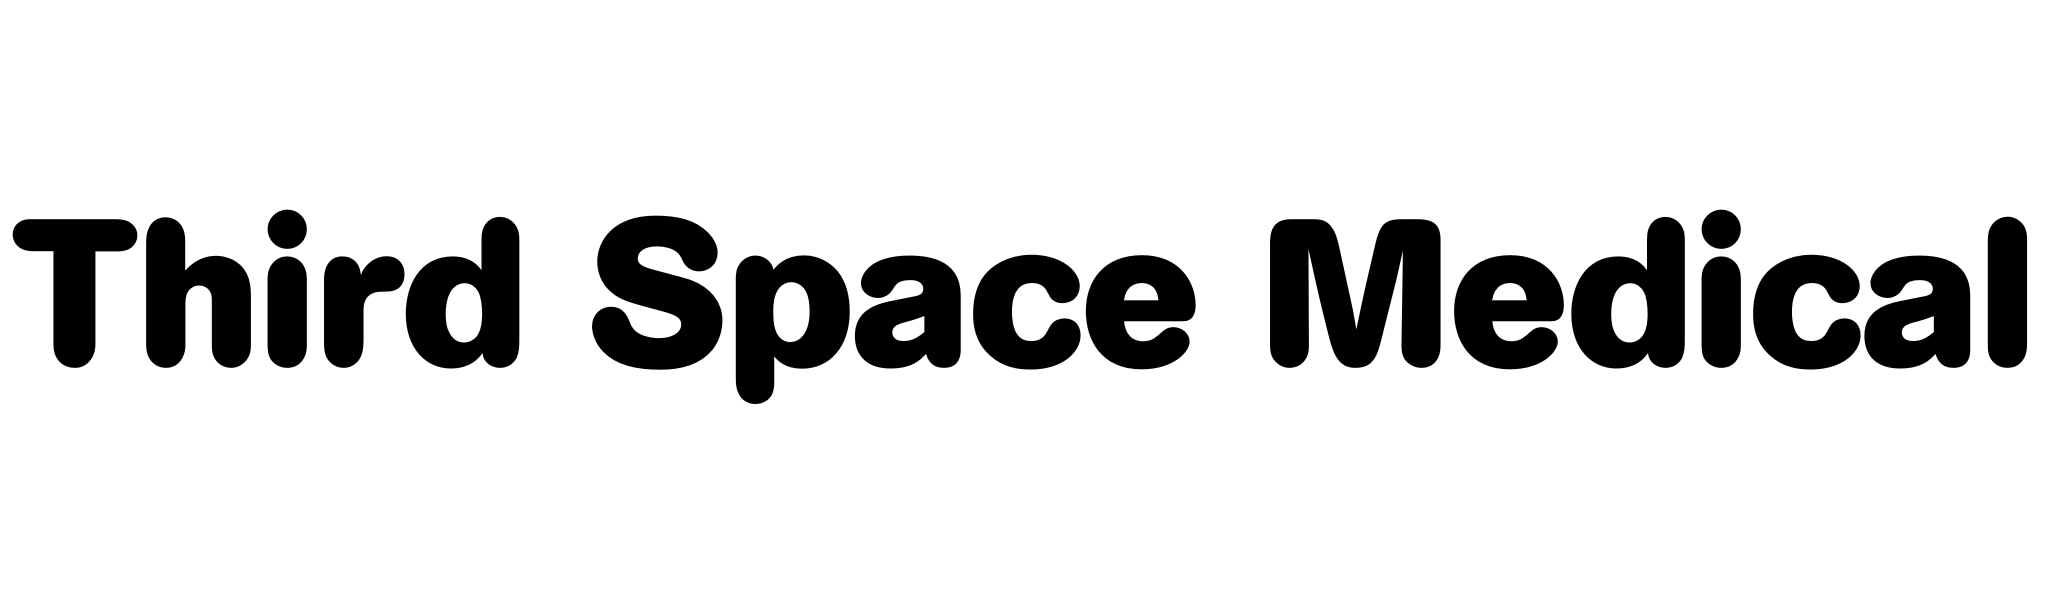 Third Space Medical (Silver)